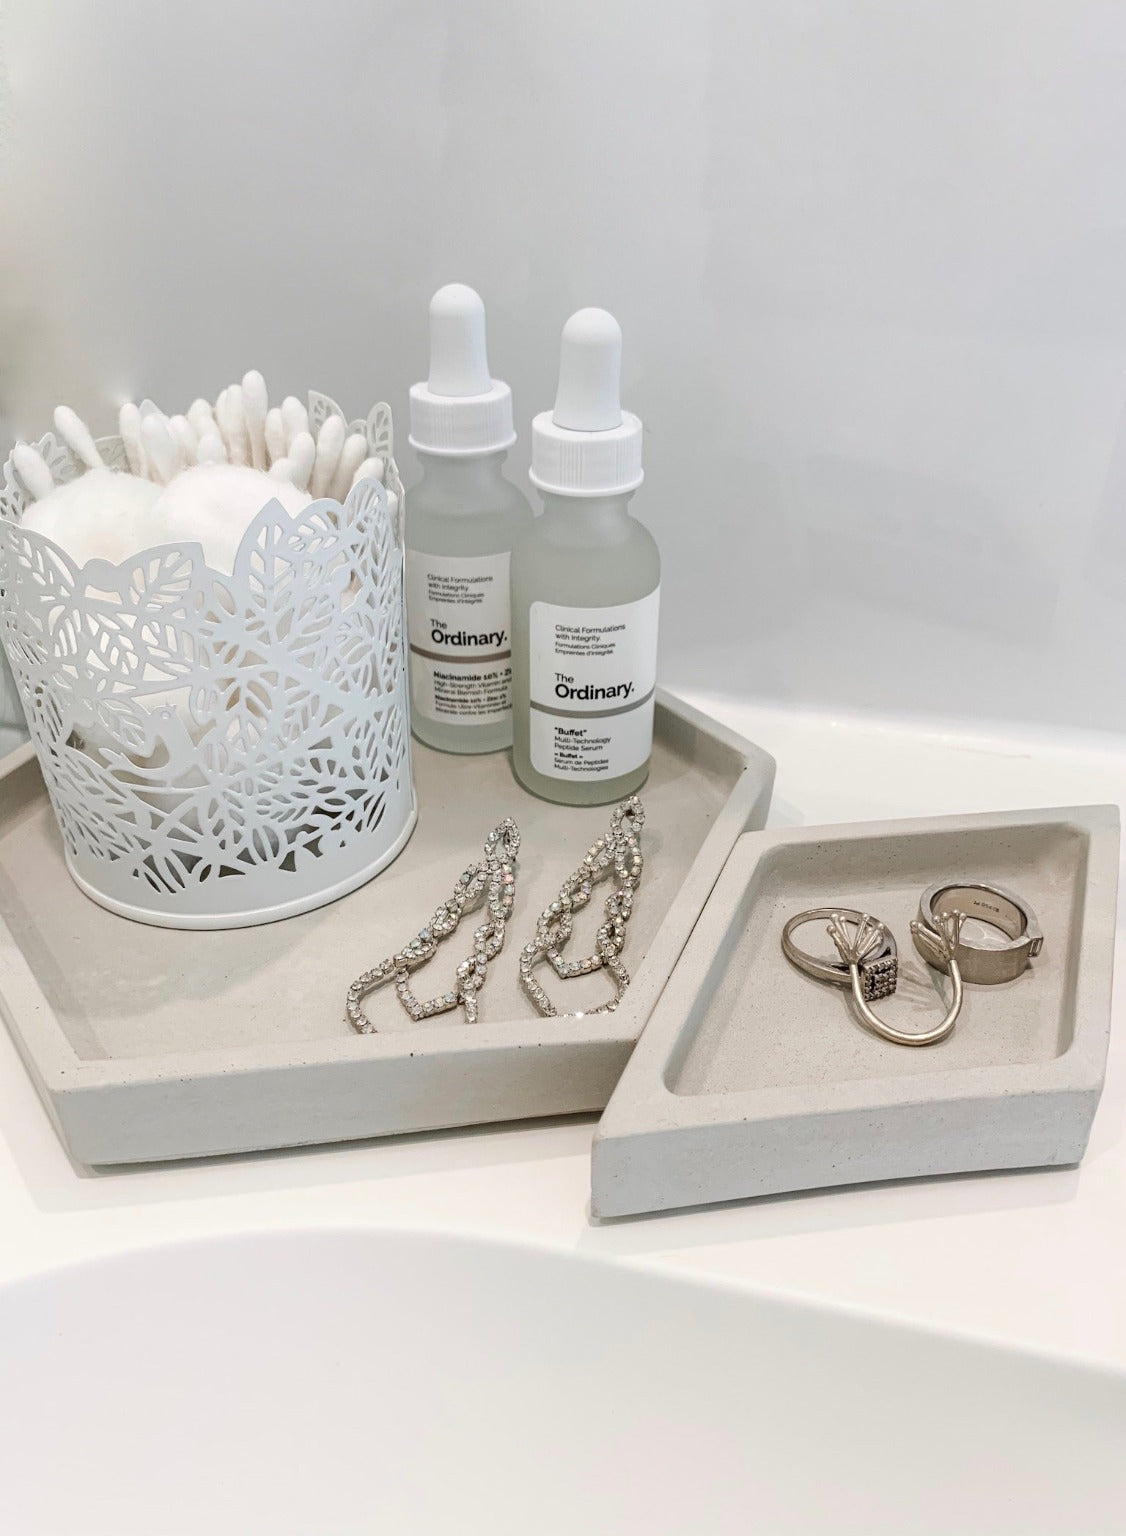 Hex Tray concrete collection on bathroom sink holding qtips/jewelry/facial creams, modern home decor